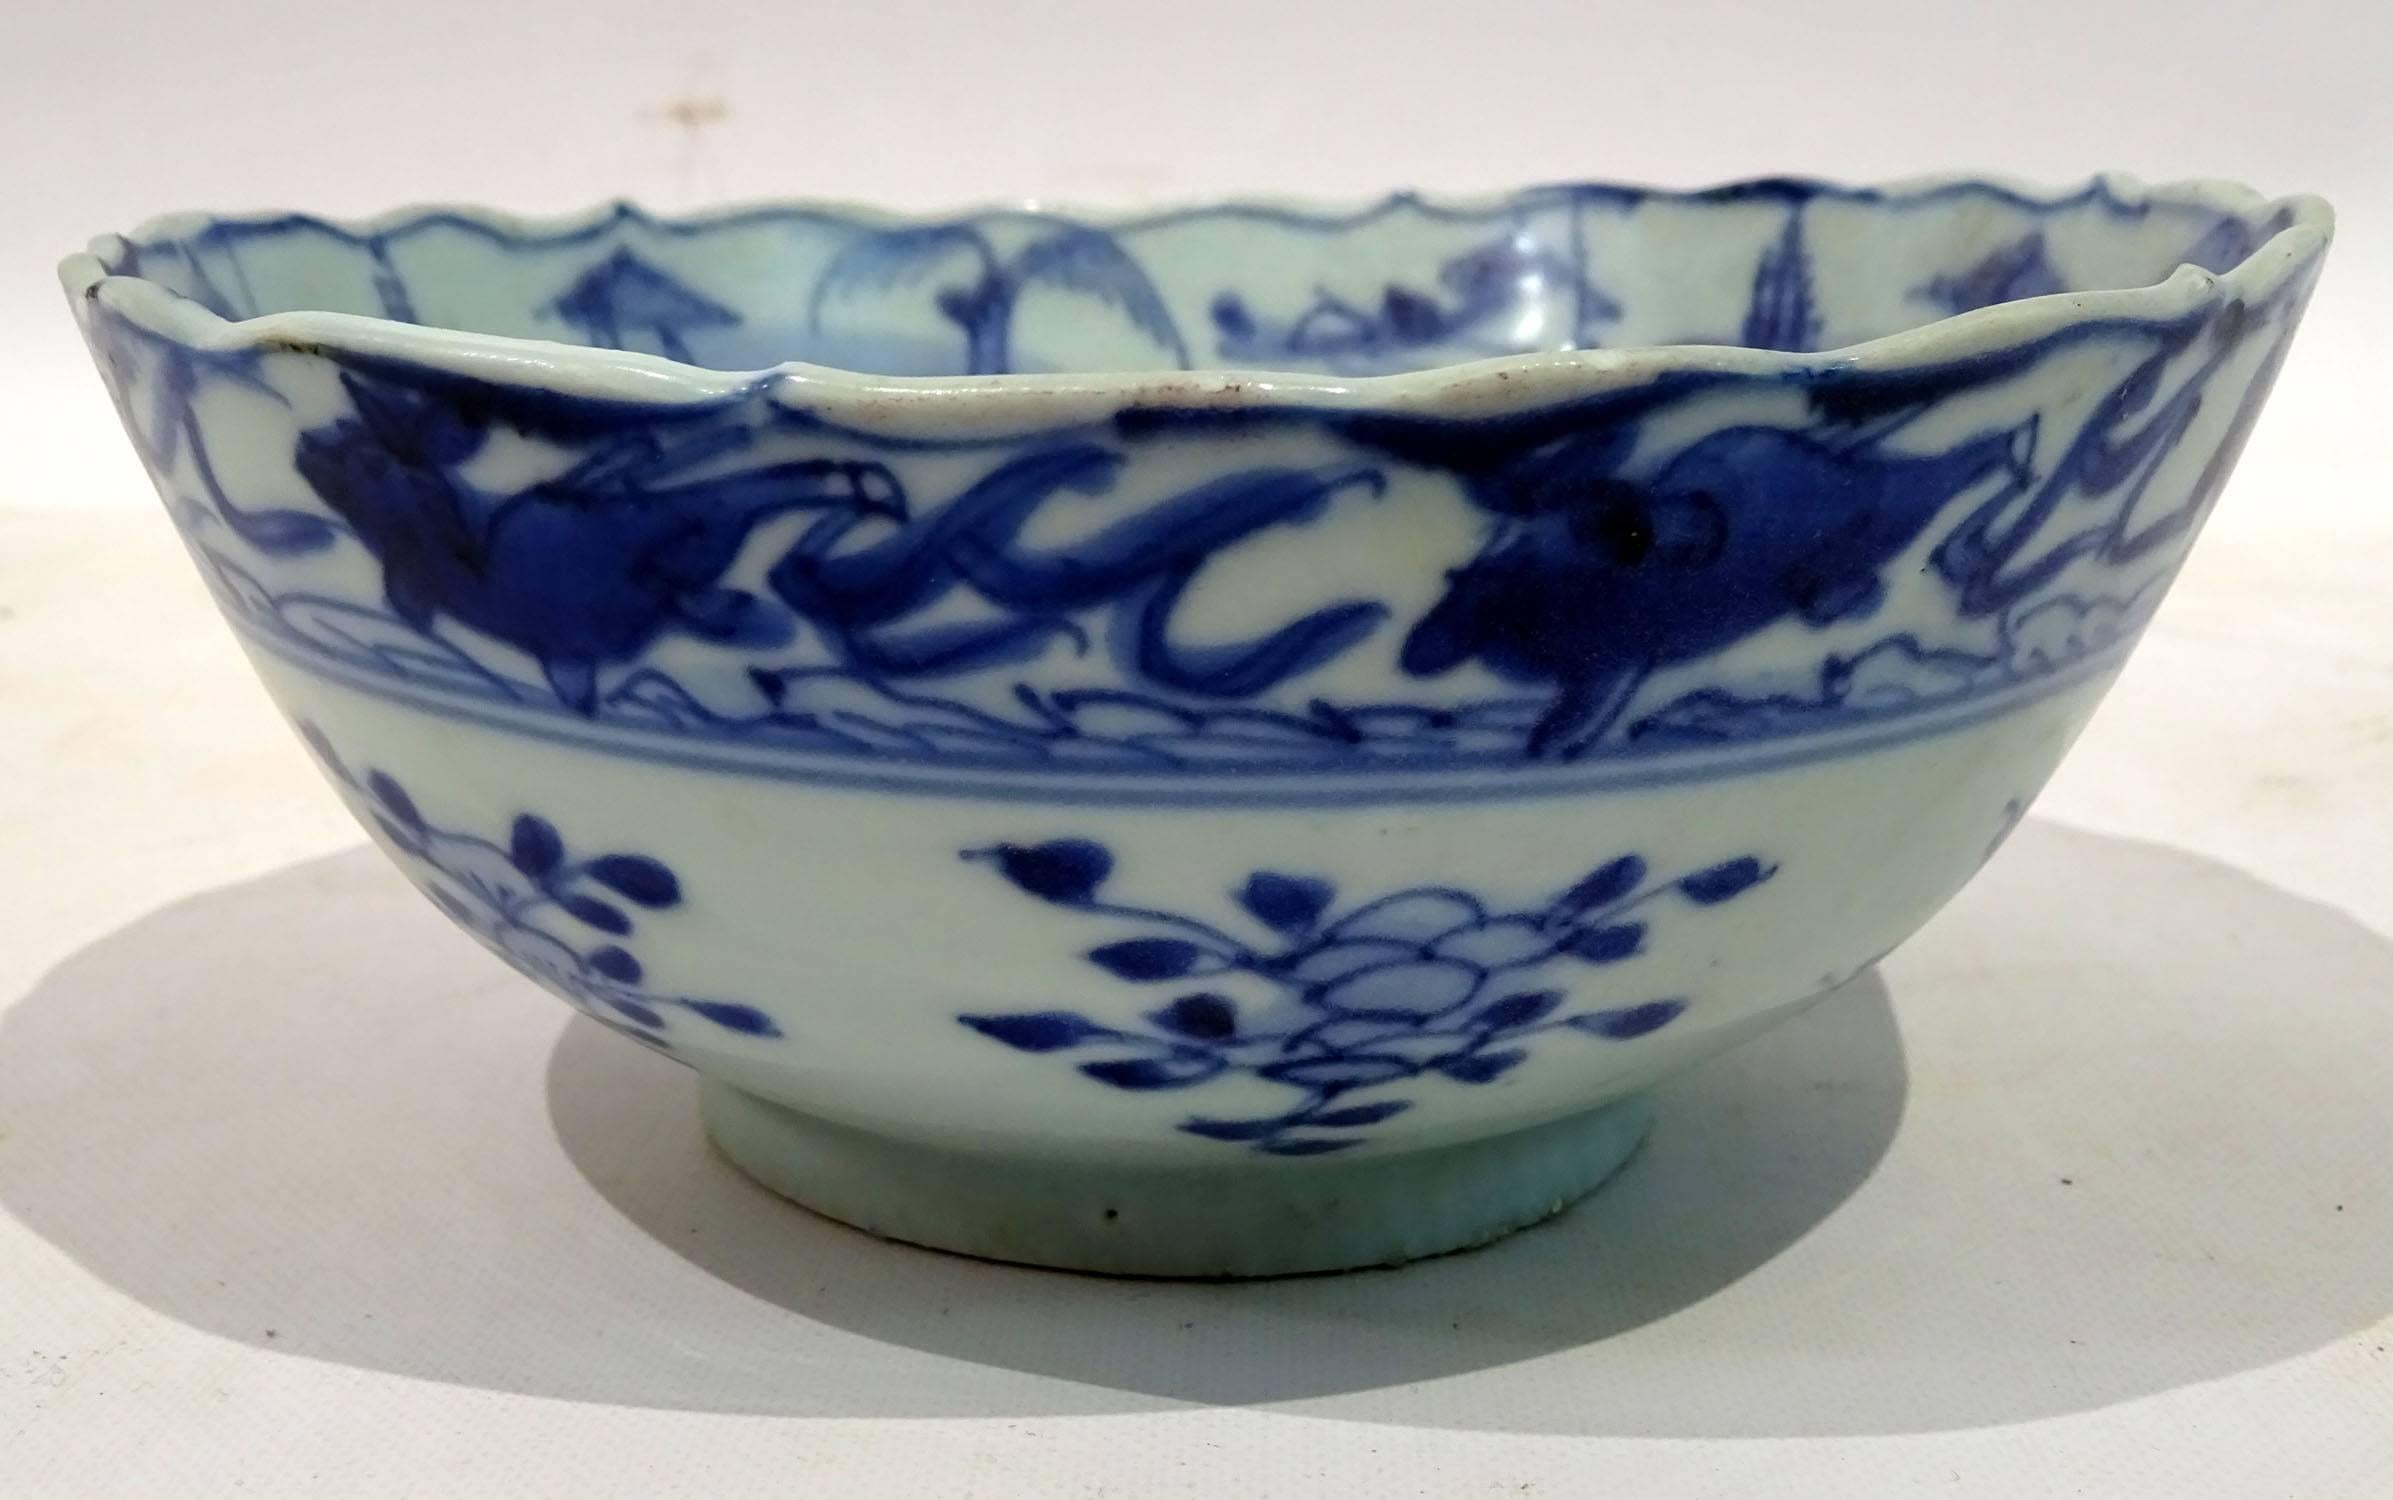 17th Century Chinese Blue and White Porcelain Bowl from The Hatcher Collection 2